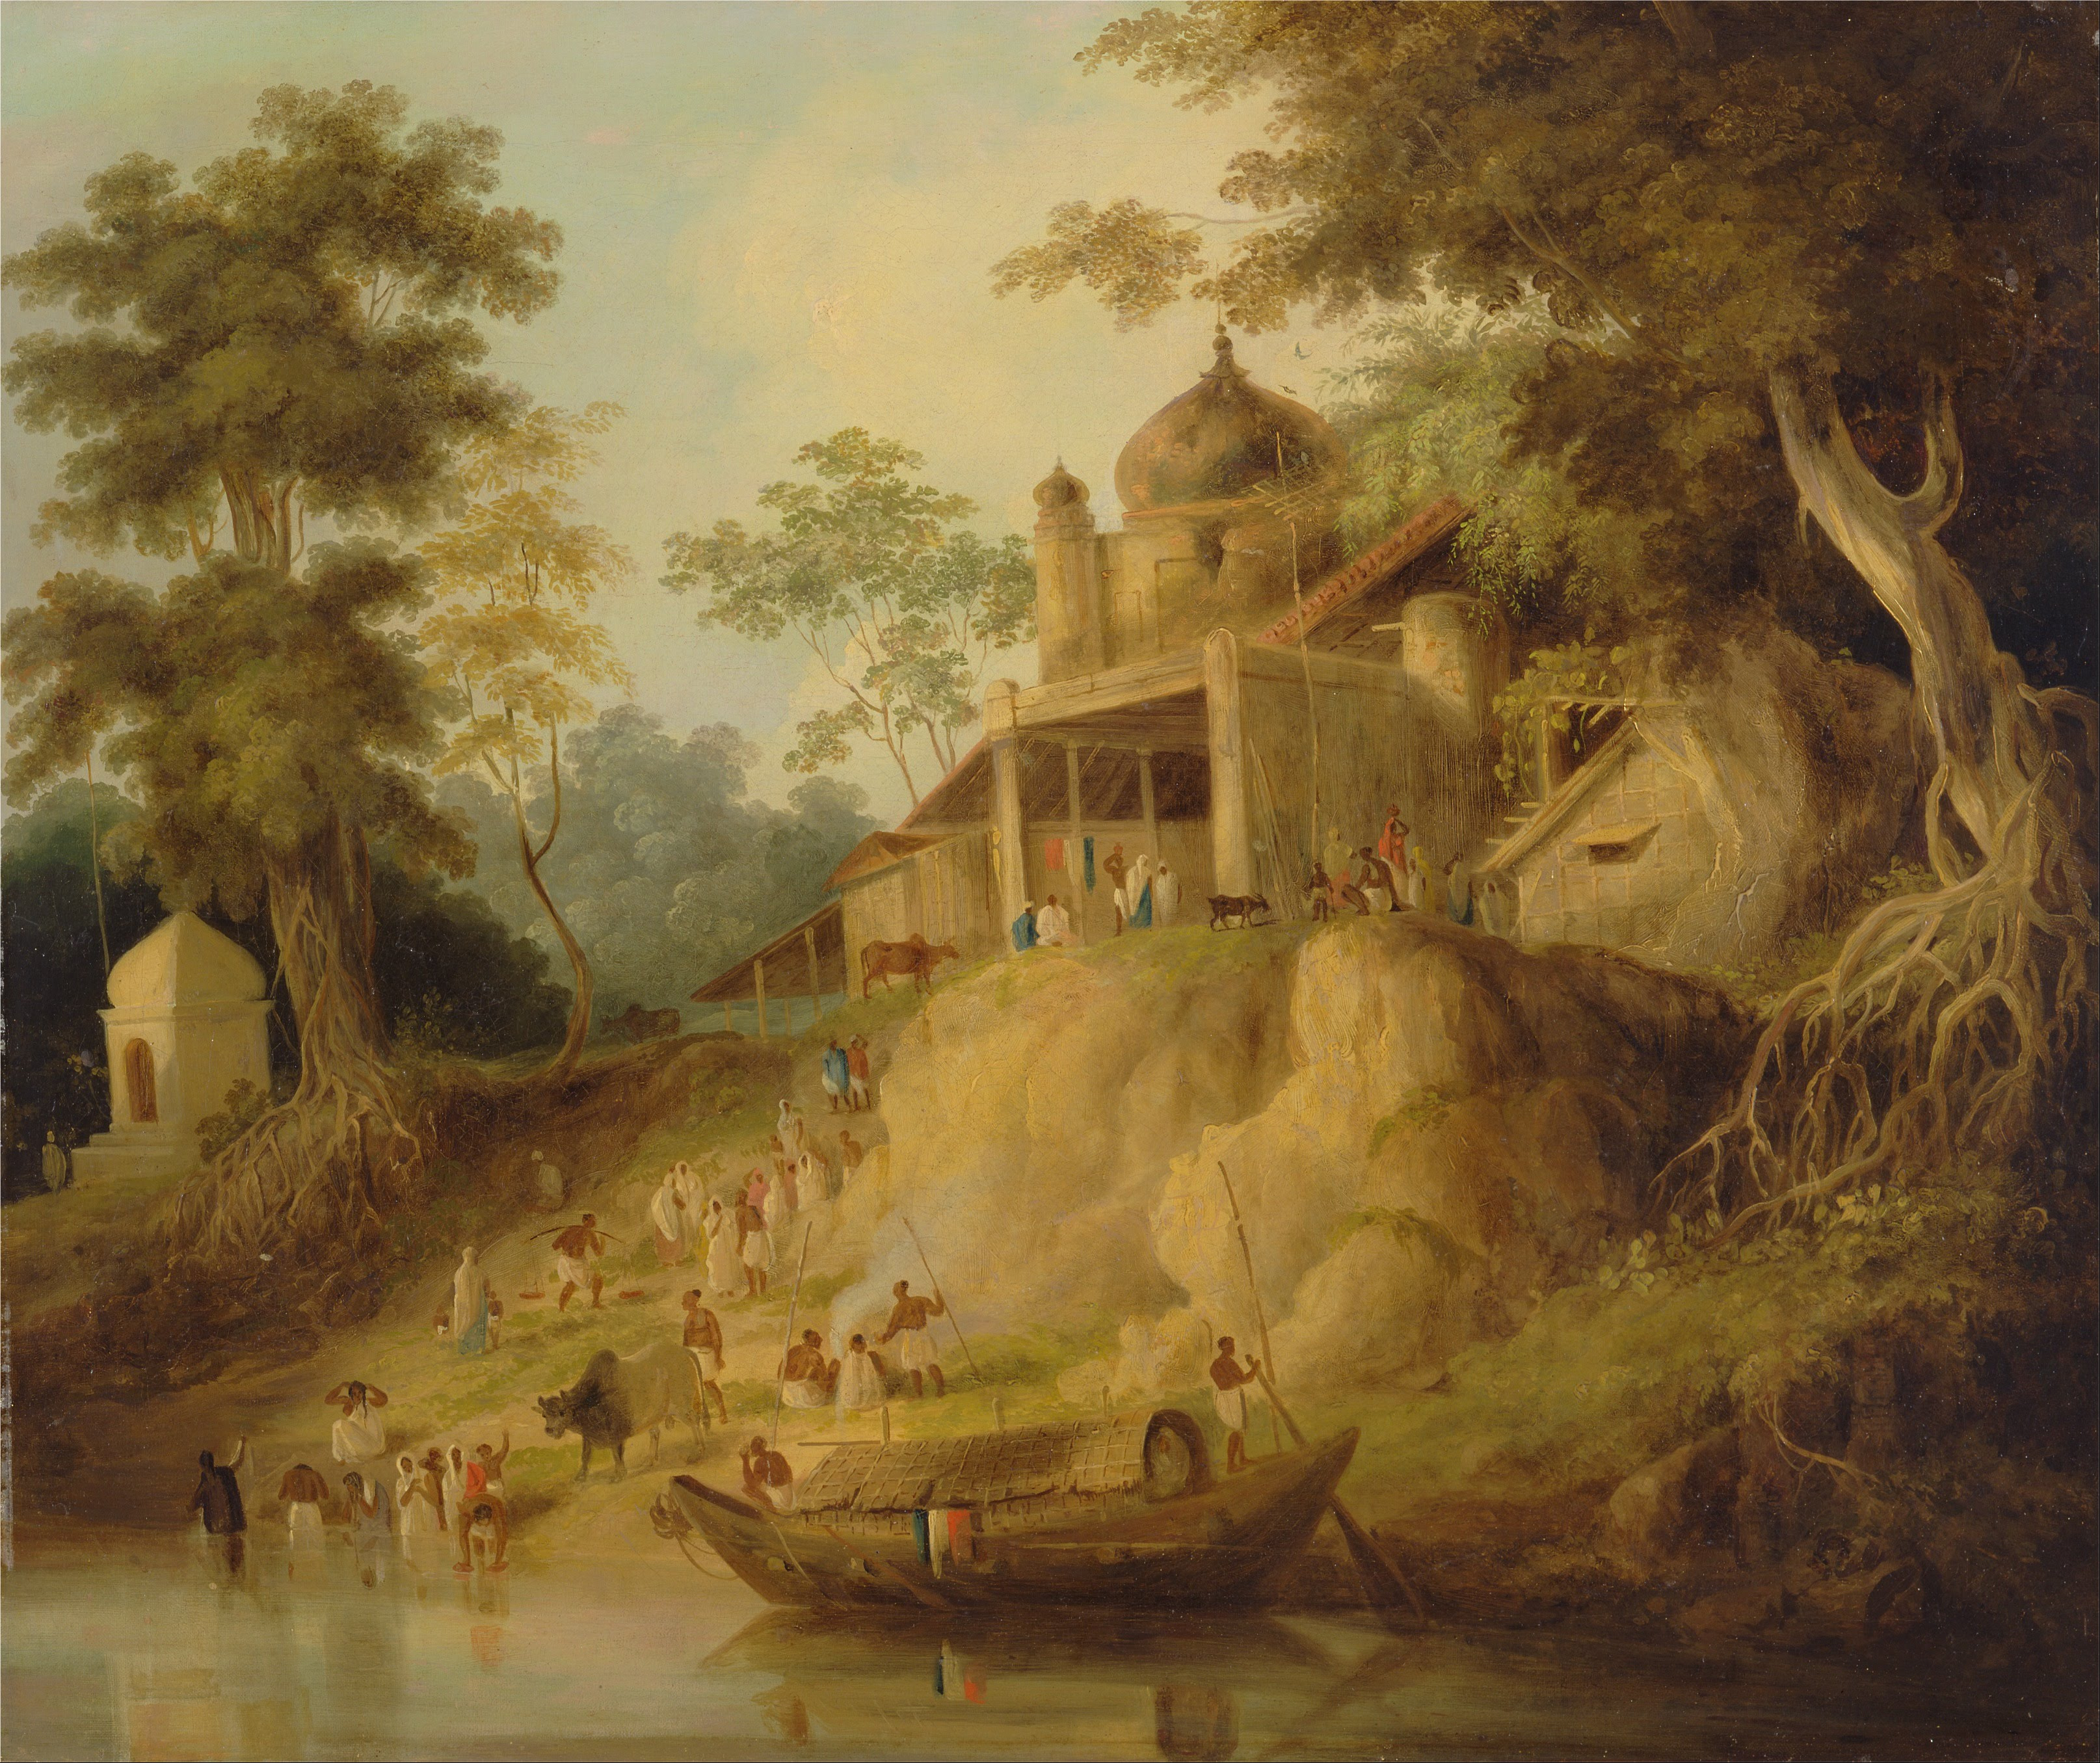 William_Daniell_-_The_Banks_of_the_Ganges